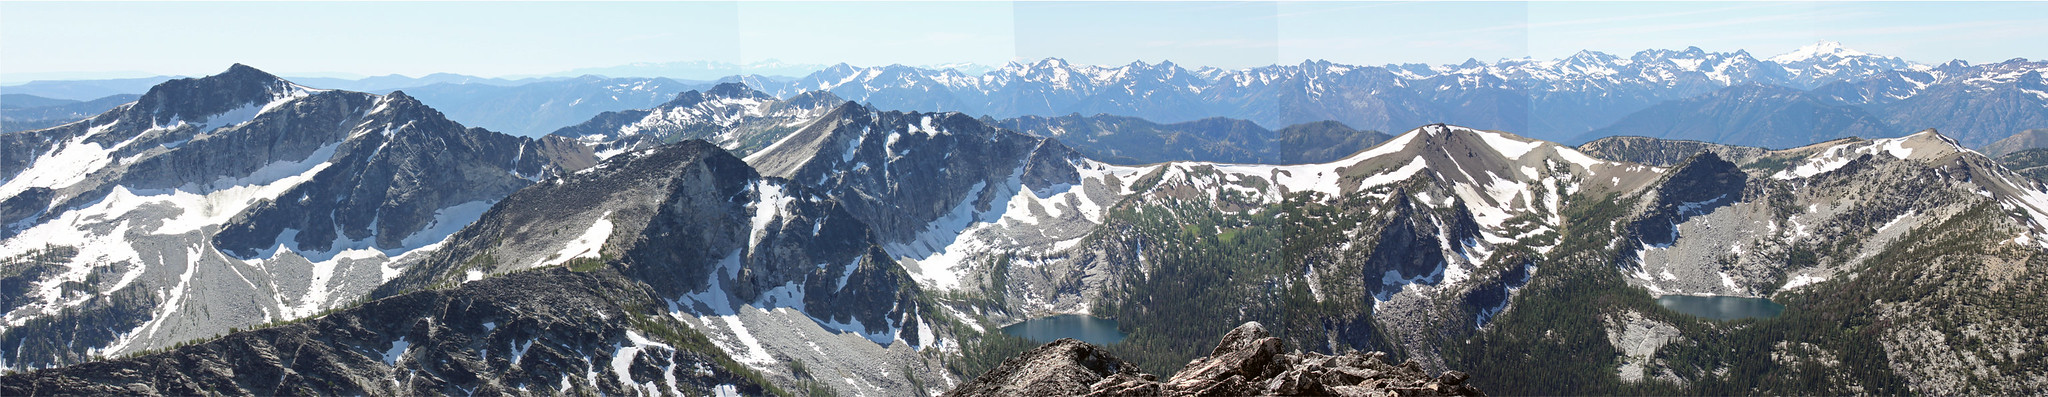 Southwestern panoramic view from Oval Peak